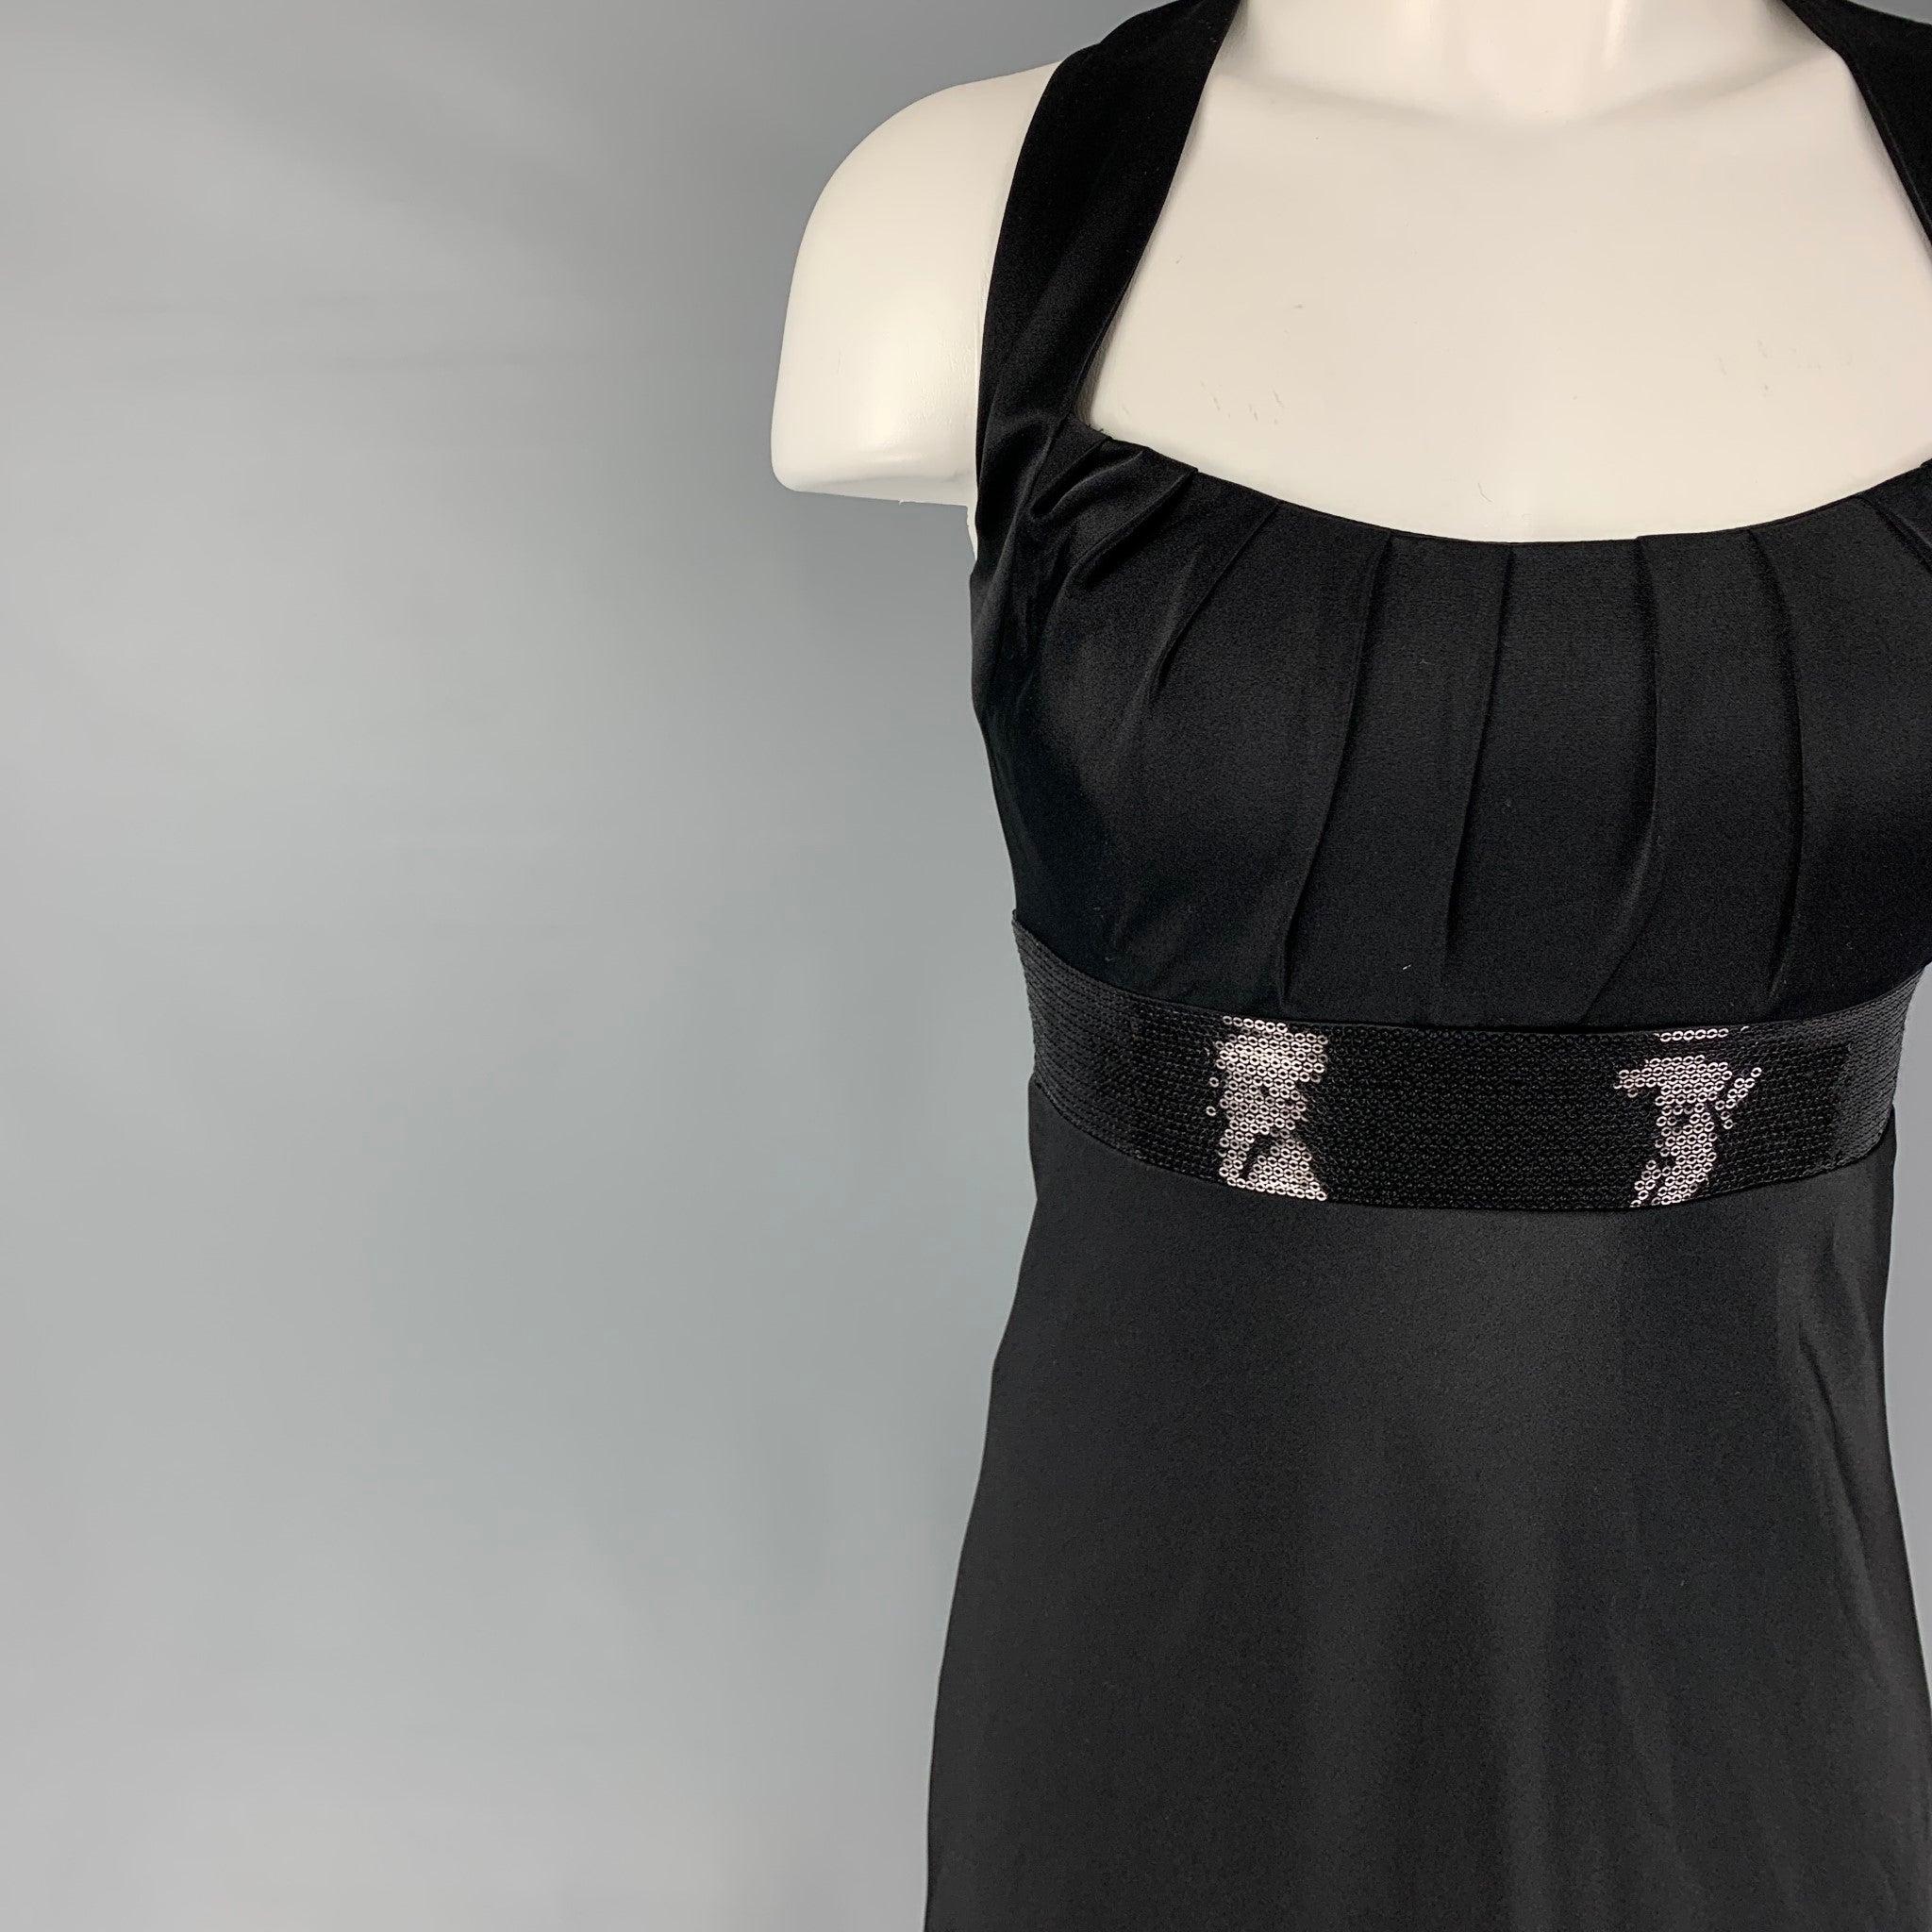 CALVIN KLEIN dress comes in a black polyester with a slip liner featuring a sequined panel detail, criss cross back, sleeveless, and a back zipper closure.
New with tags.
 

Marked:  2 

Measurements: 
 Bust: 30 inches Waist: 26 inches Hip: 34